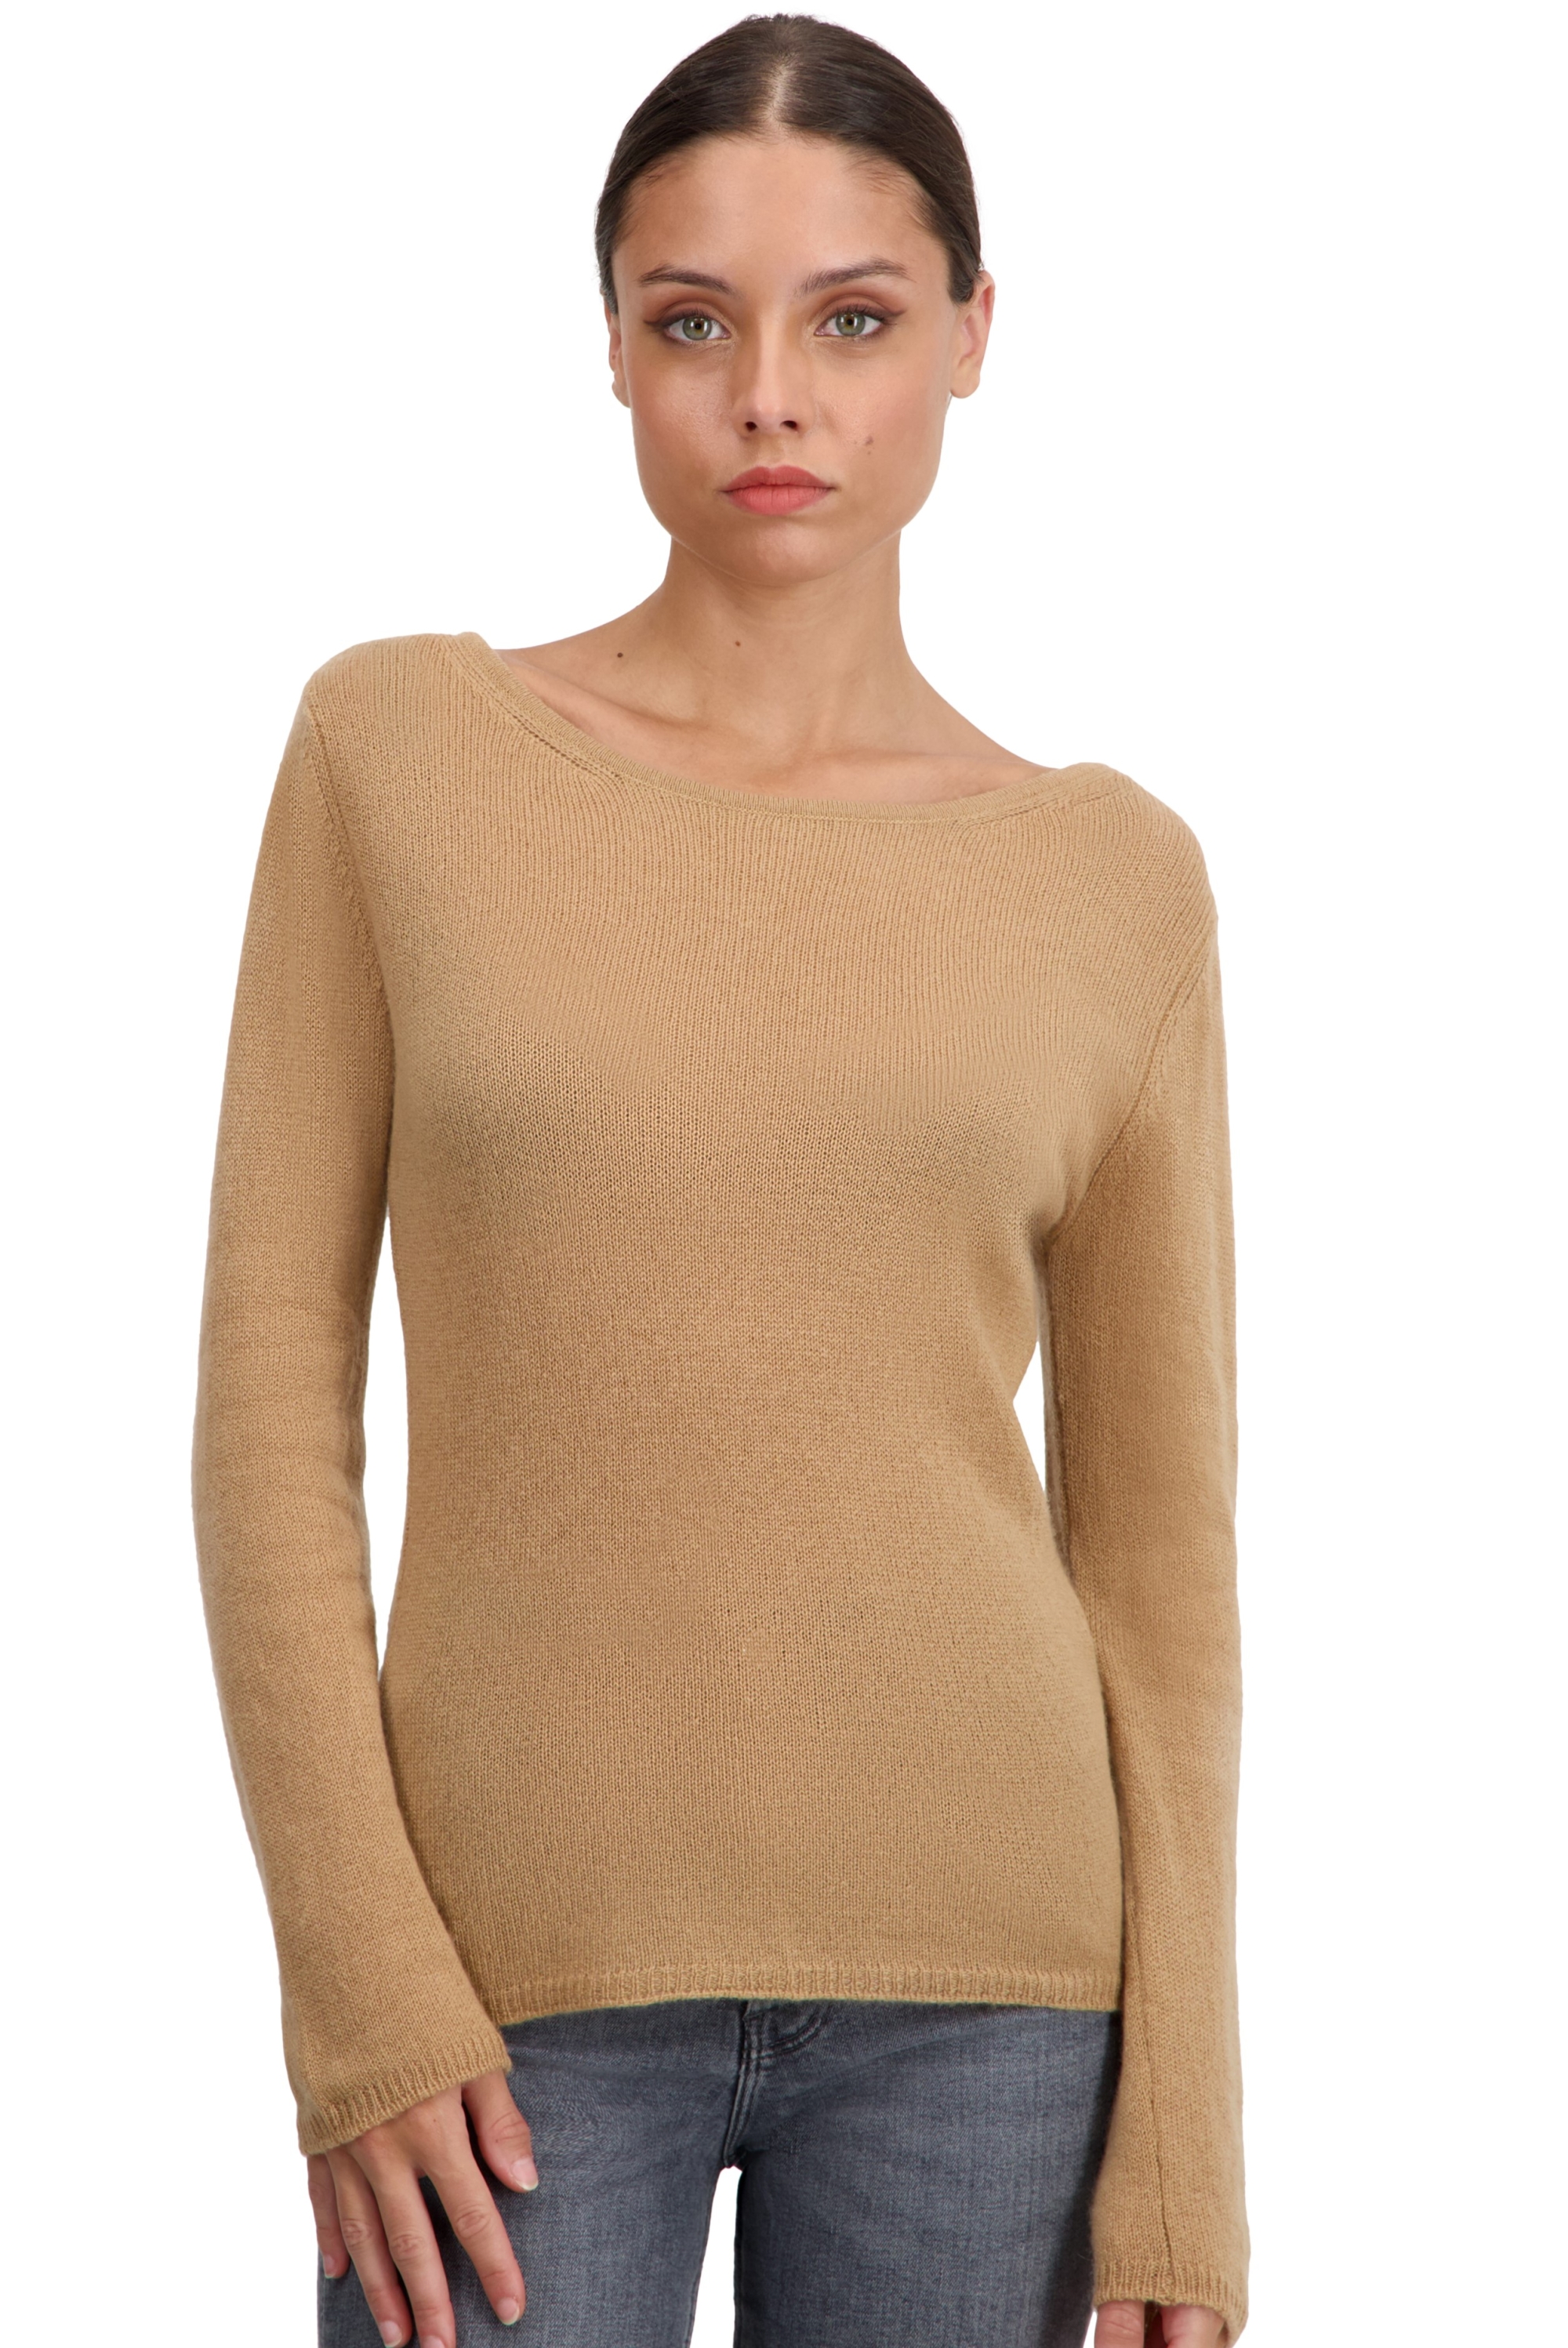 Cashmere ladies timeless classics caleen camel 3xl